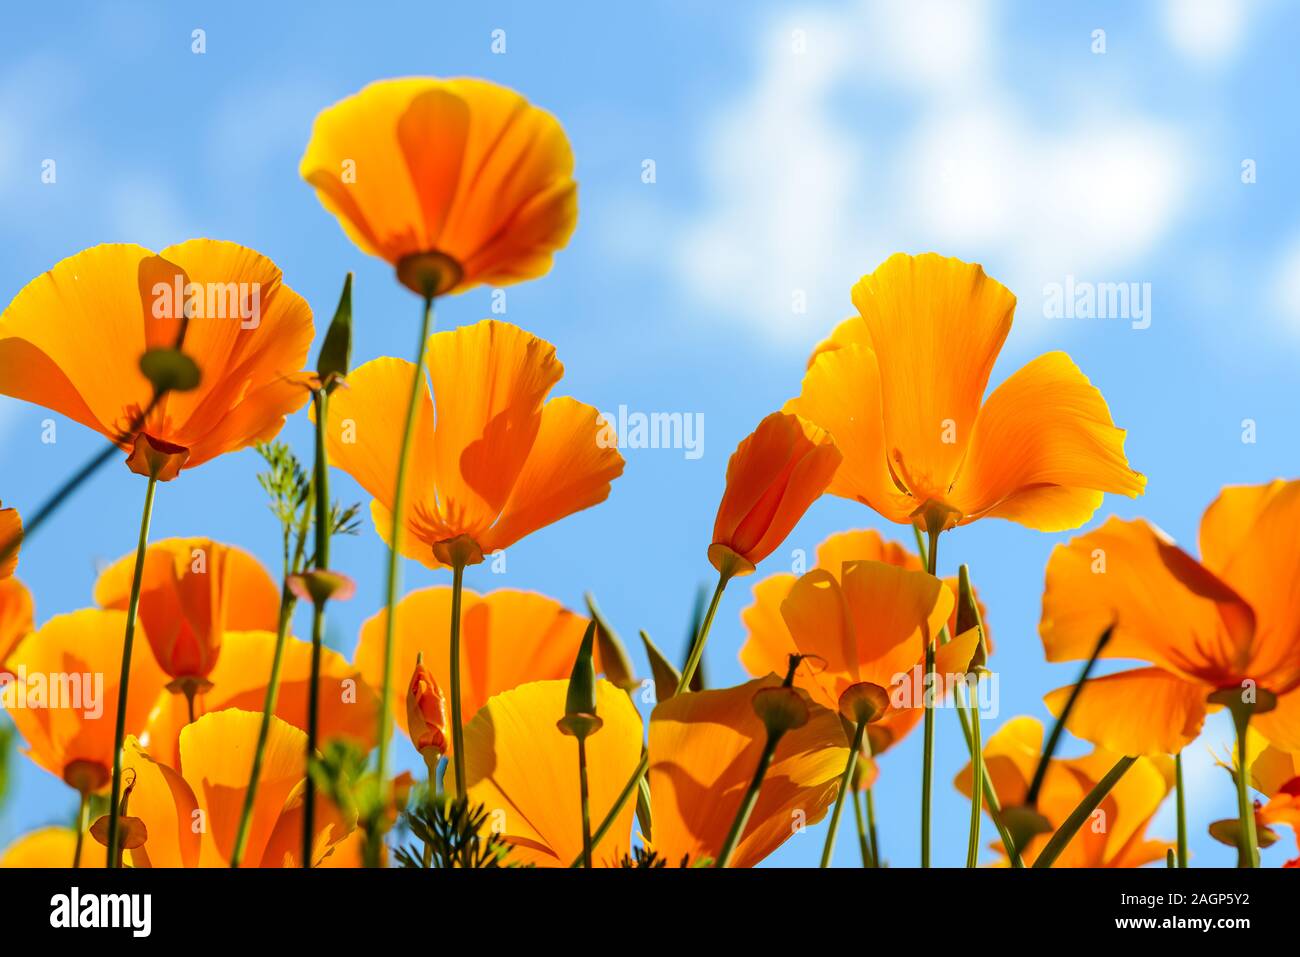 Save The Bay SF on Twitter Getting tired of your background in Zoom  Download this photo and have your next meeting in a field of California  Poppies httpstcofhj6vbF3gg  Twitter